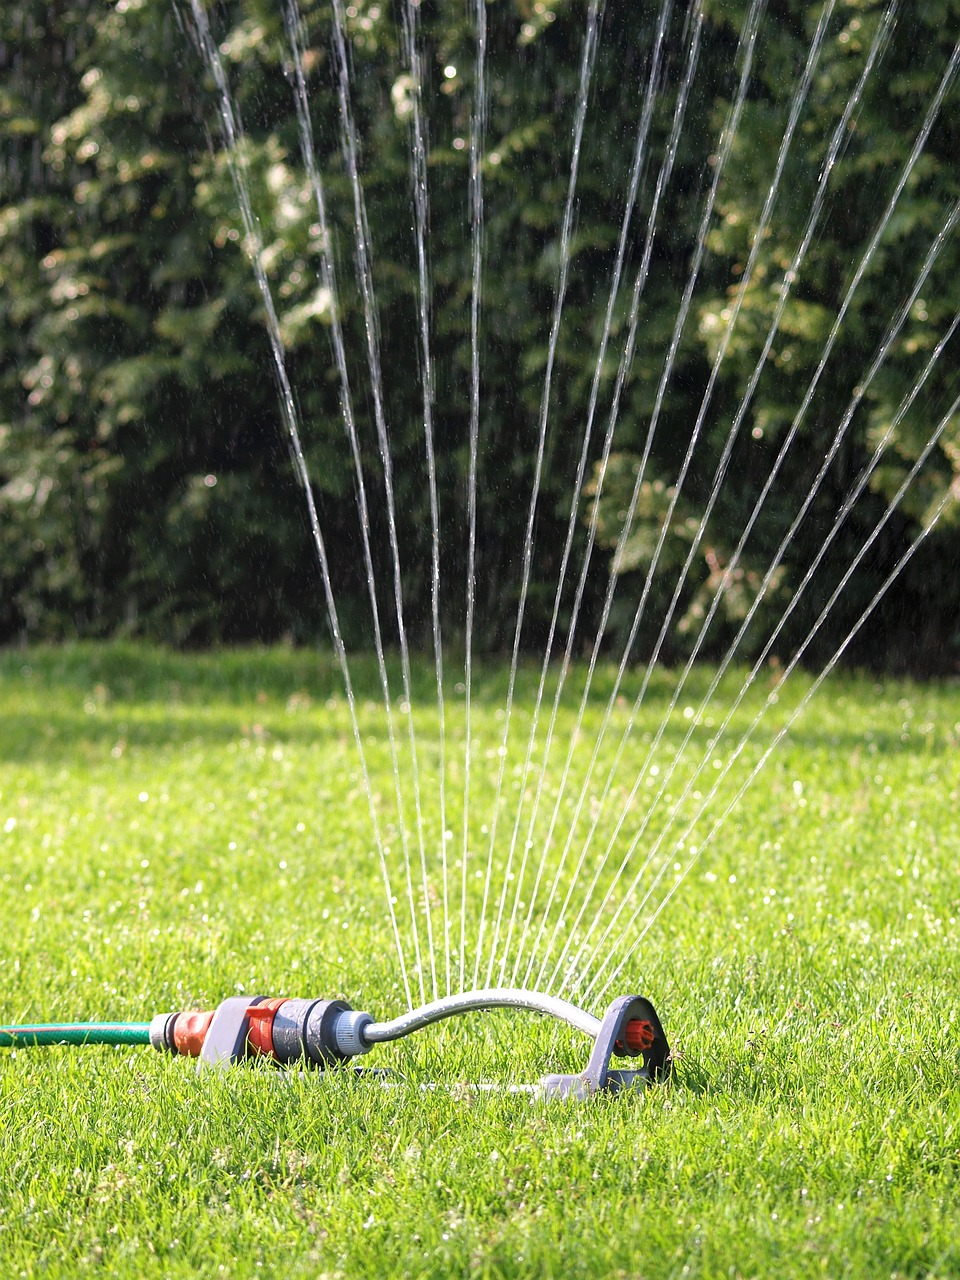 How To Properly Set Up And Adjust Your Sprinklers For Optimal Coverage